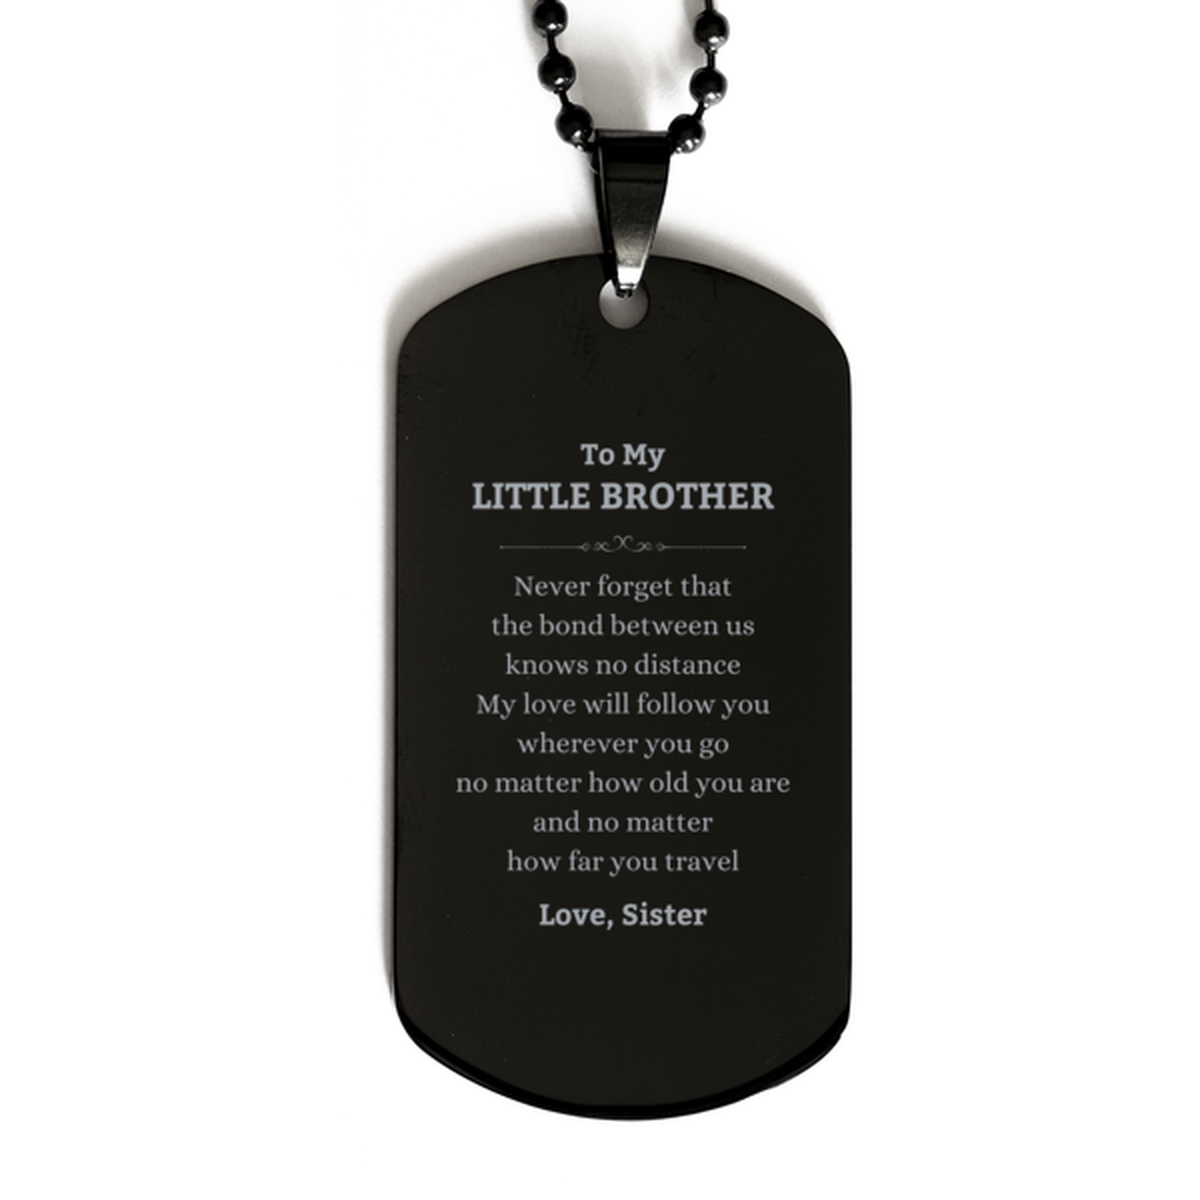 Little Brother Birthday Gifts from Sister, Adjustable Black Dog Tag for Little Brother Christmas Graduation Unique Gifts Little Brother Never forget that the bond between us knows no distance. Love, Sister